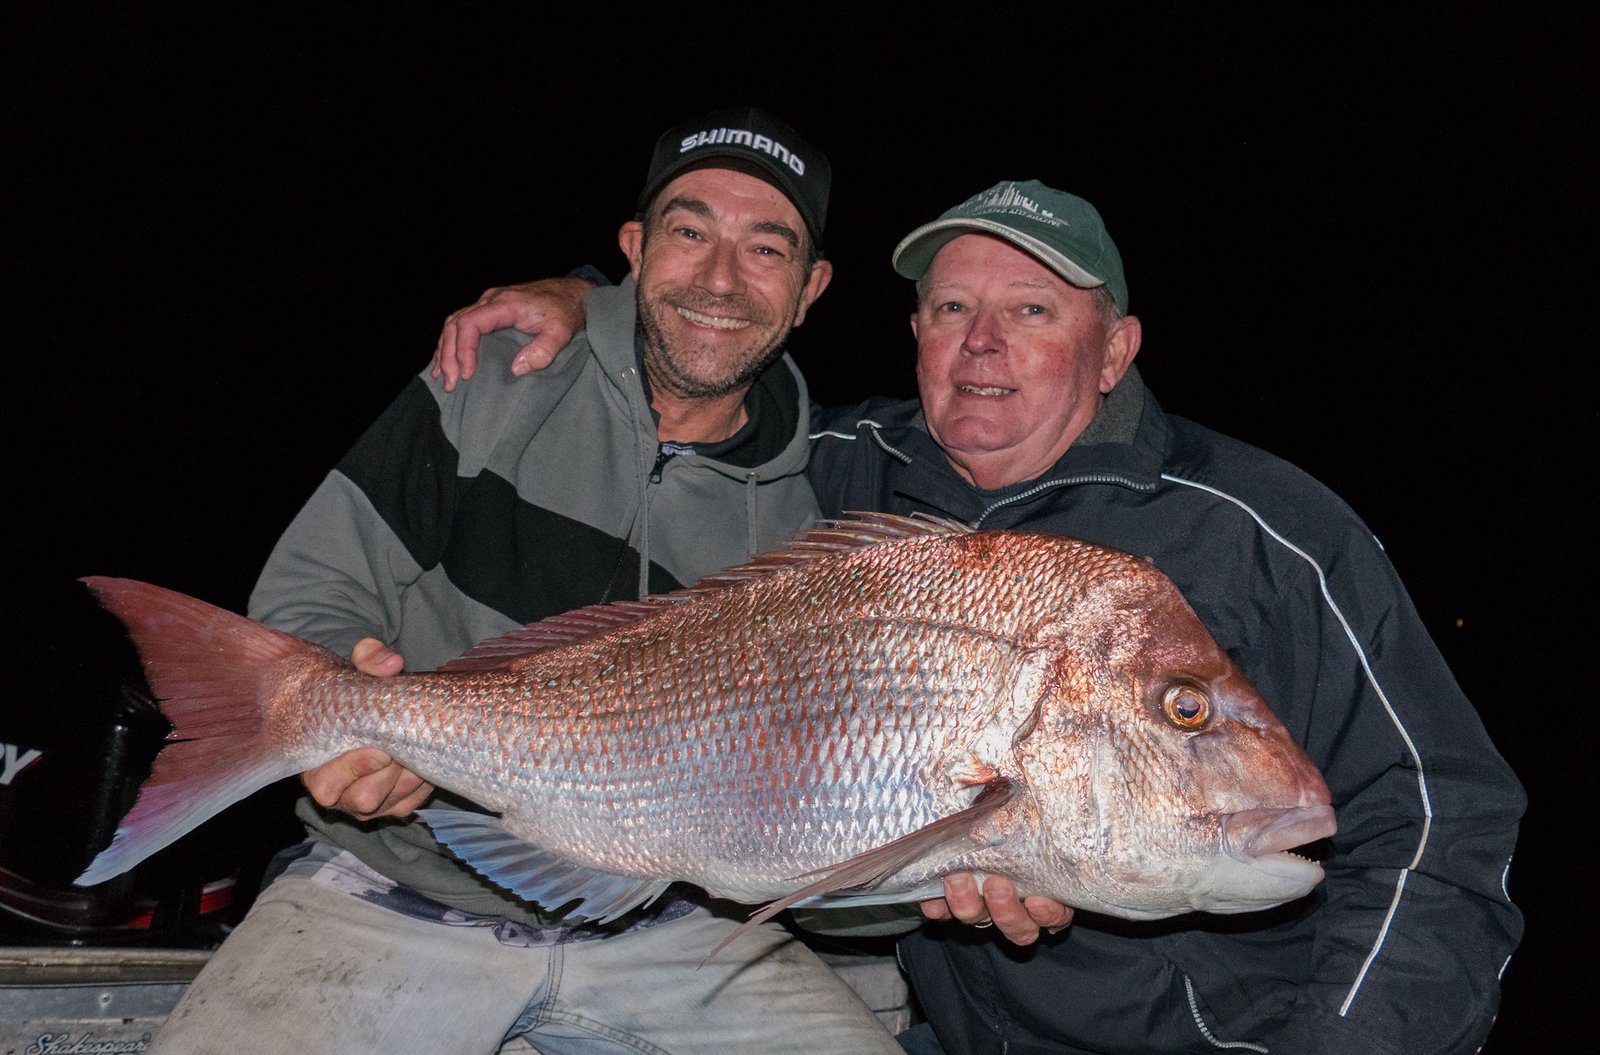 Nick & Miggsy with a Pink Snapper